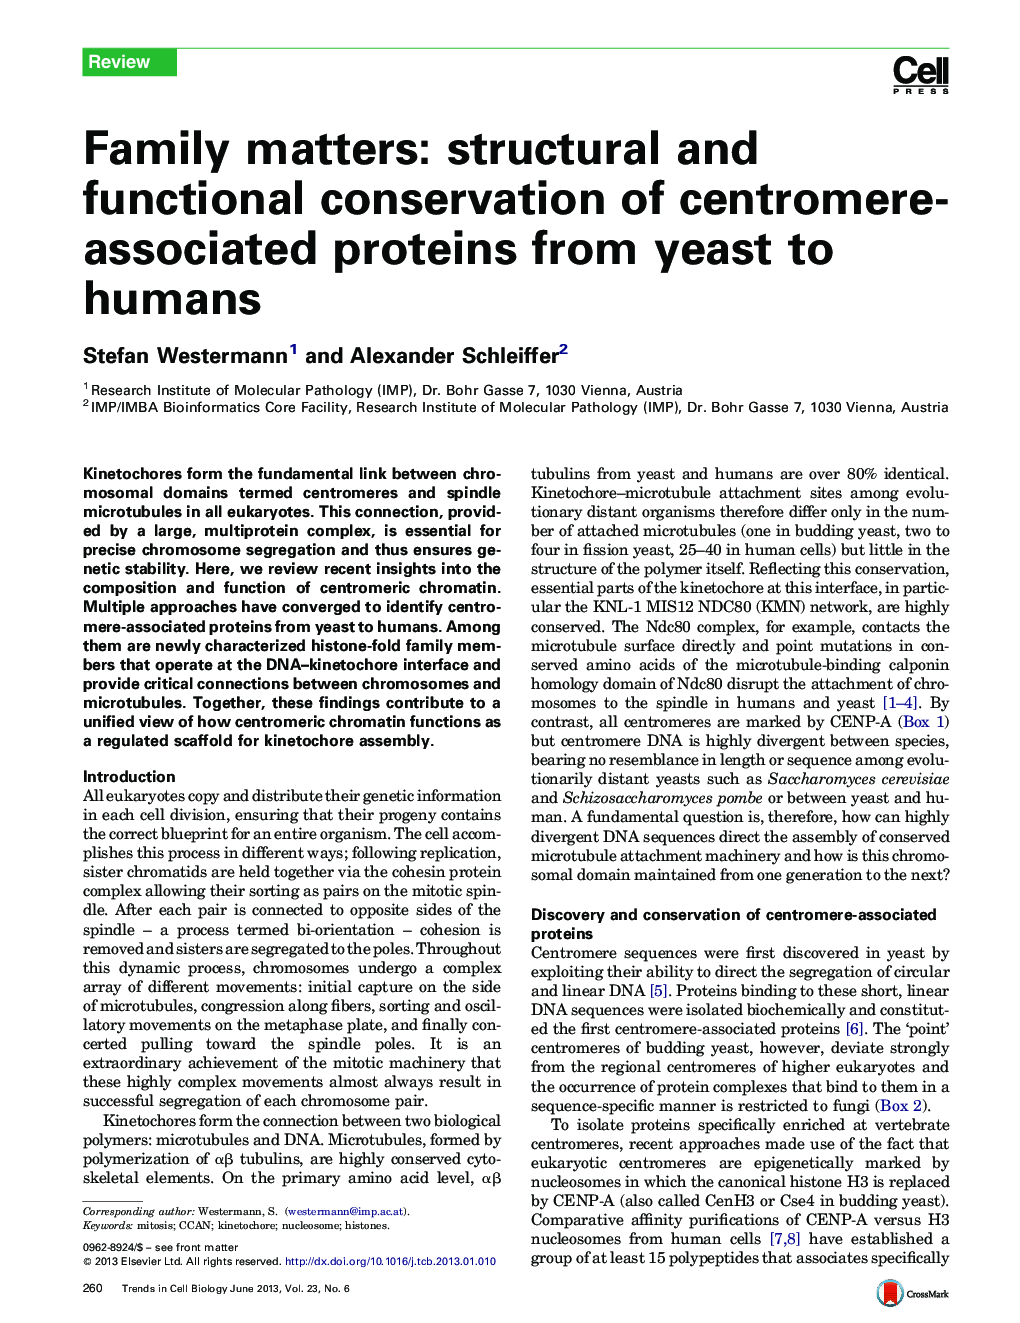 Family matters: structural and functional conservation of centromere-associated proteins from yeast to humans